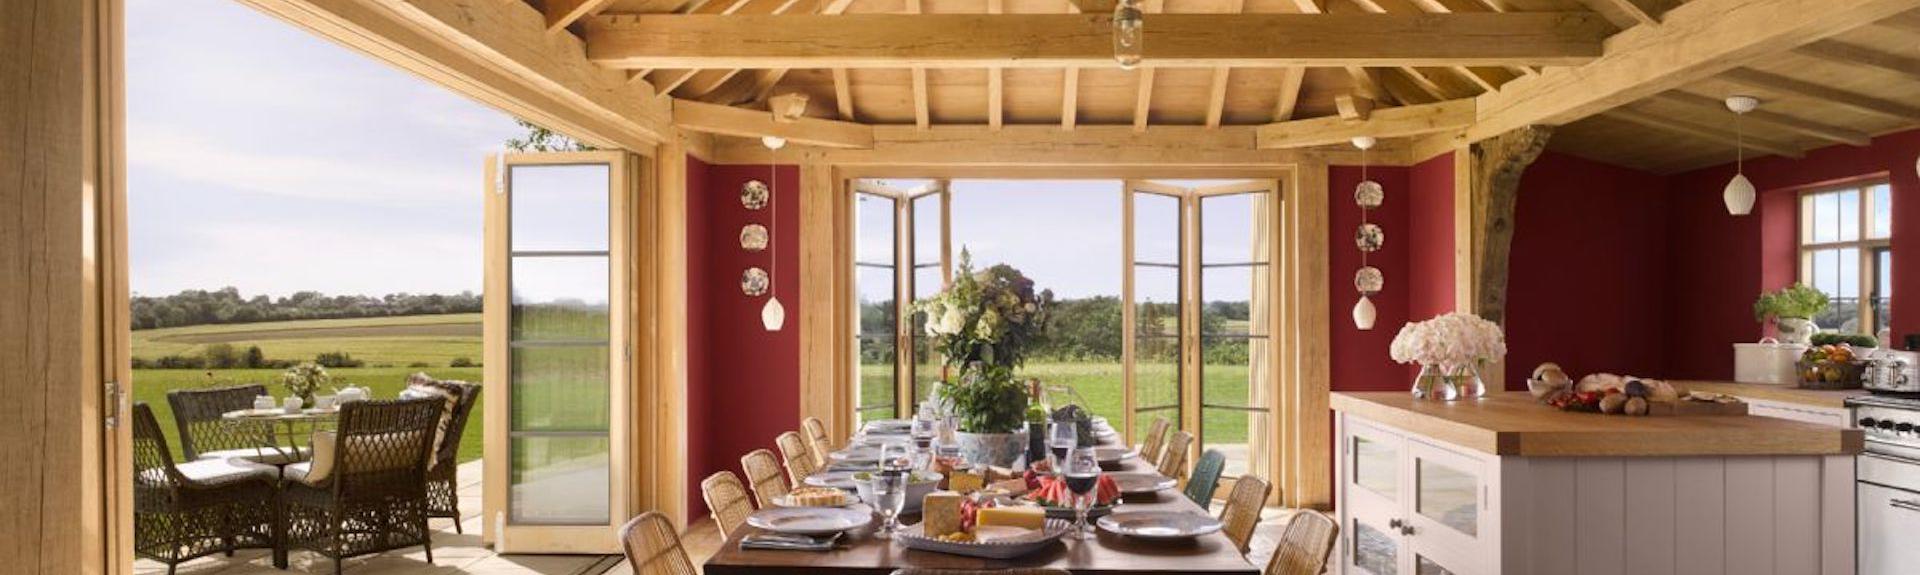 A dining table for 12 is laid for dinner under the oak beams of a country cottage kitchen